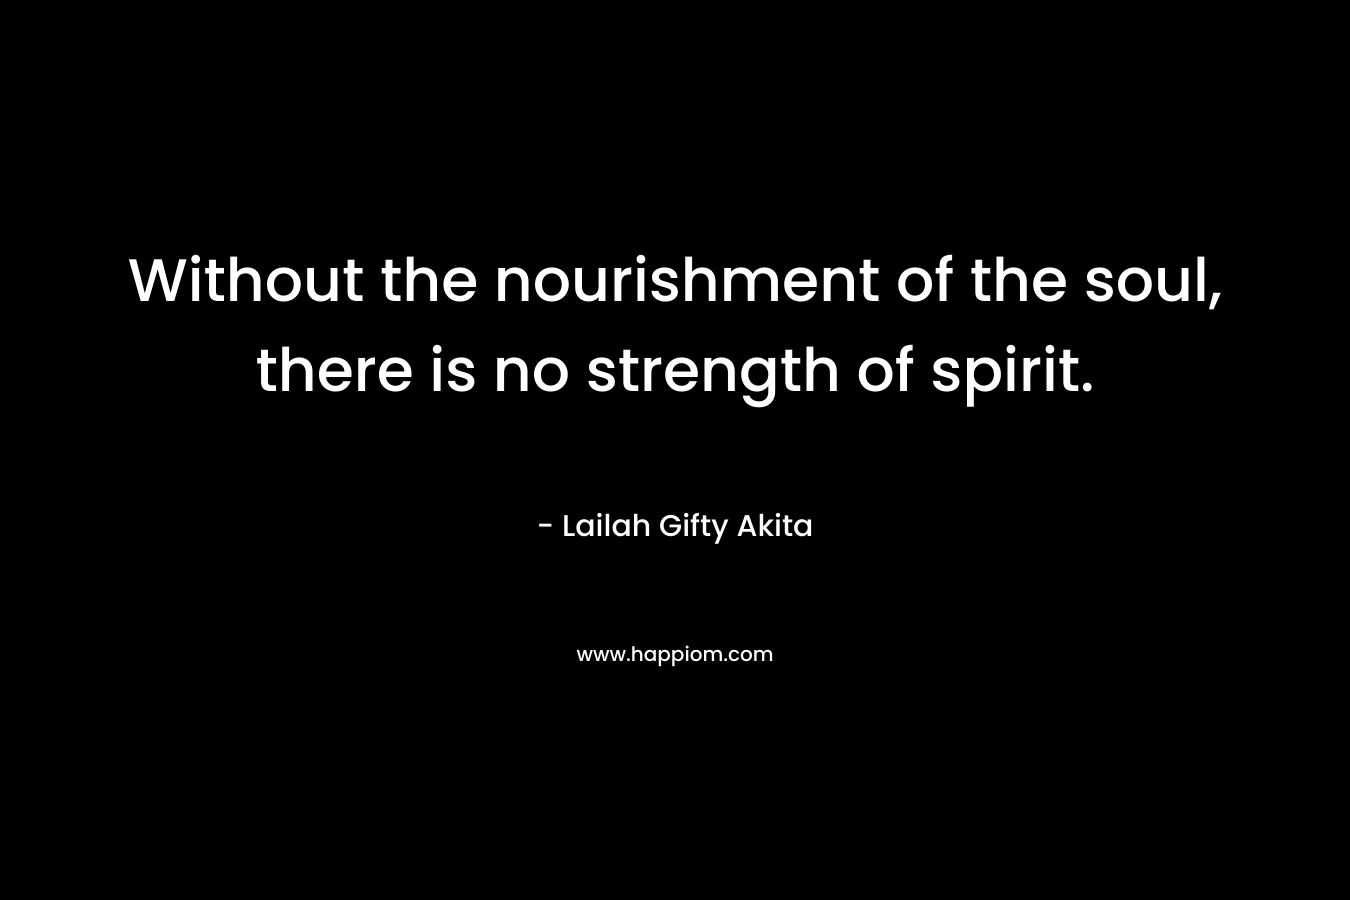 Without the nourishment of the soul, there is no strength of spirit.